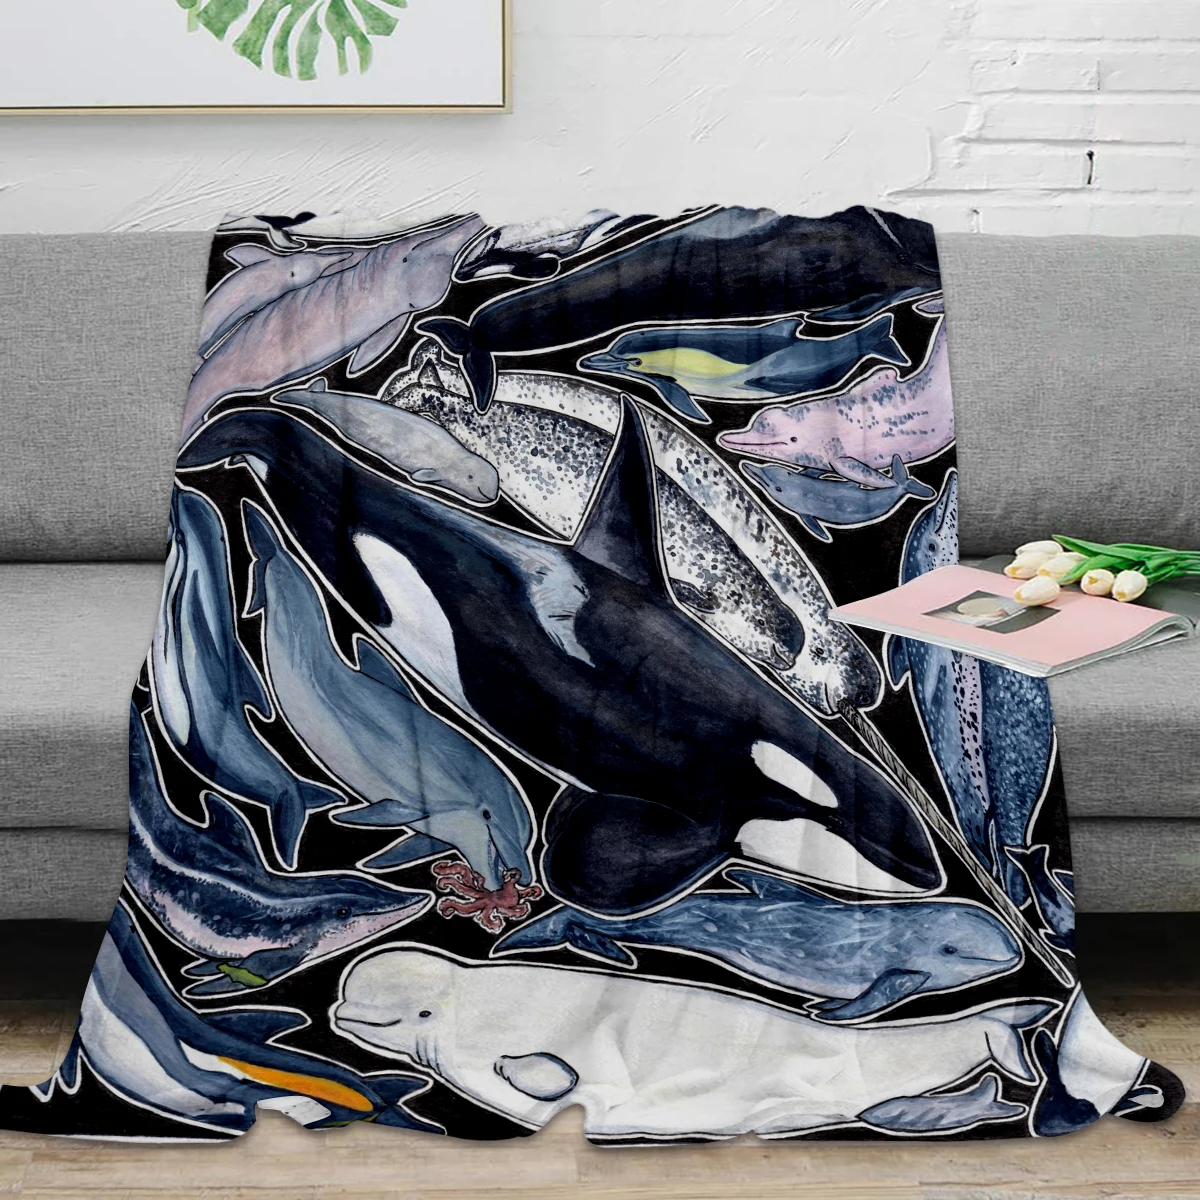 Dolphin, orca, beluga, narwhal & cie  Throw Blanket Warm Microfiber Blanket Flannel Blanket Blankets For Beds